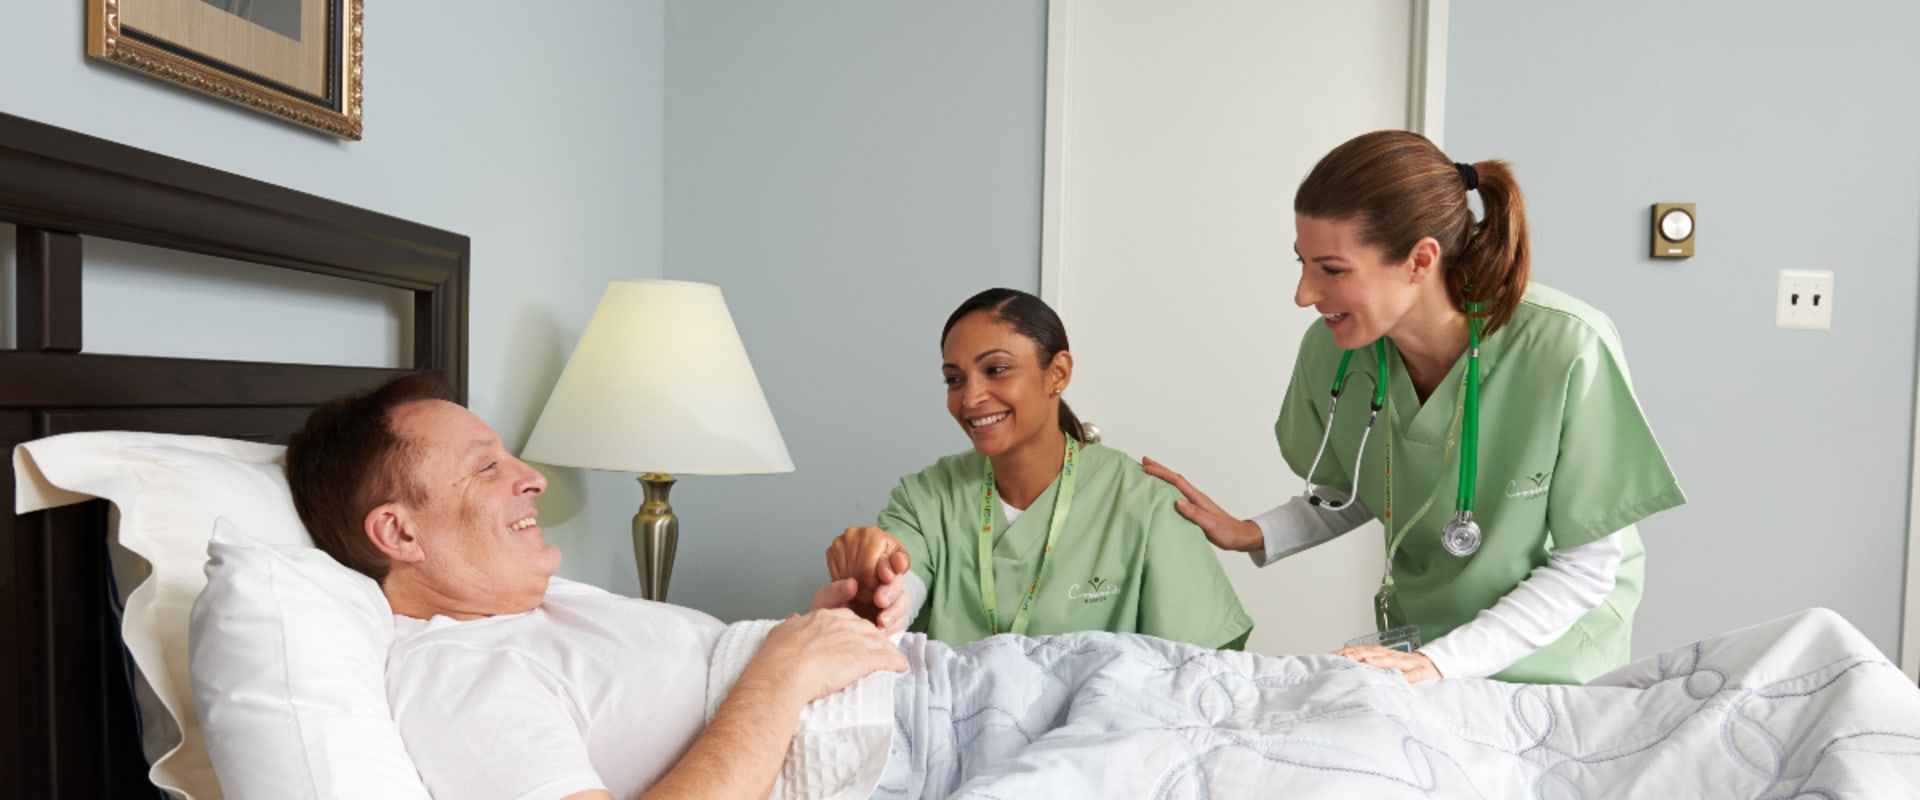 What does hospice mean in medical terms?